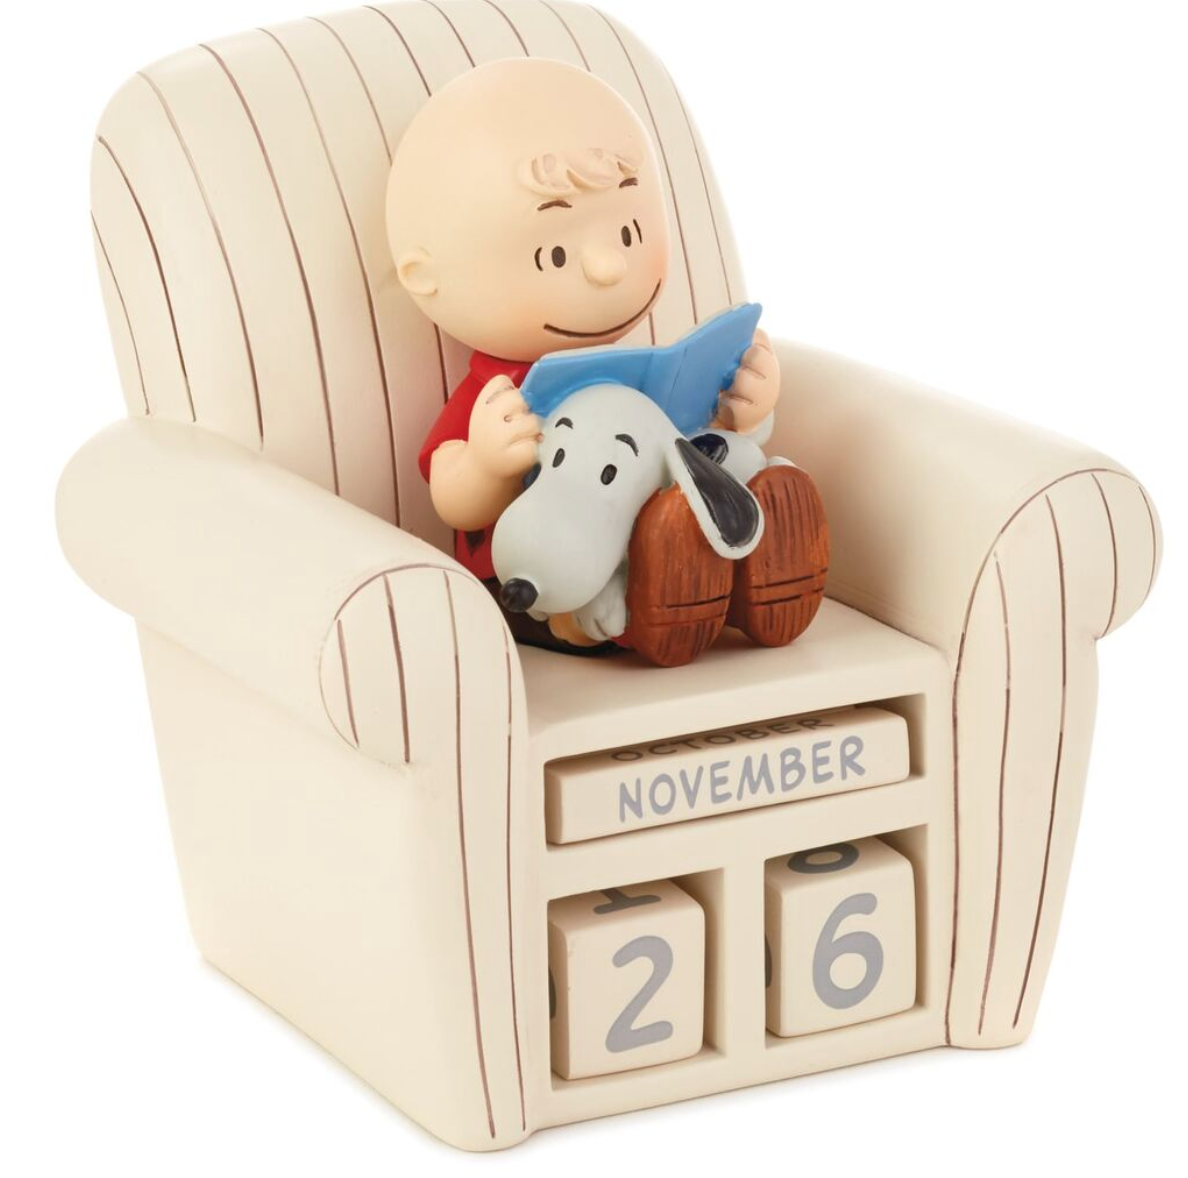 Hallmark Peanuts Charlie Brown Chair and Snoopy Perpetual Calendar New